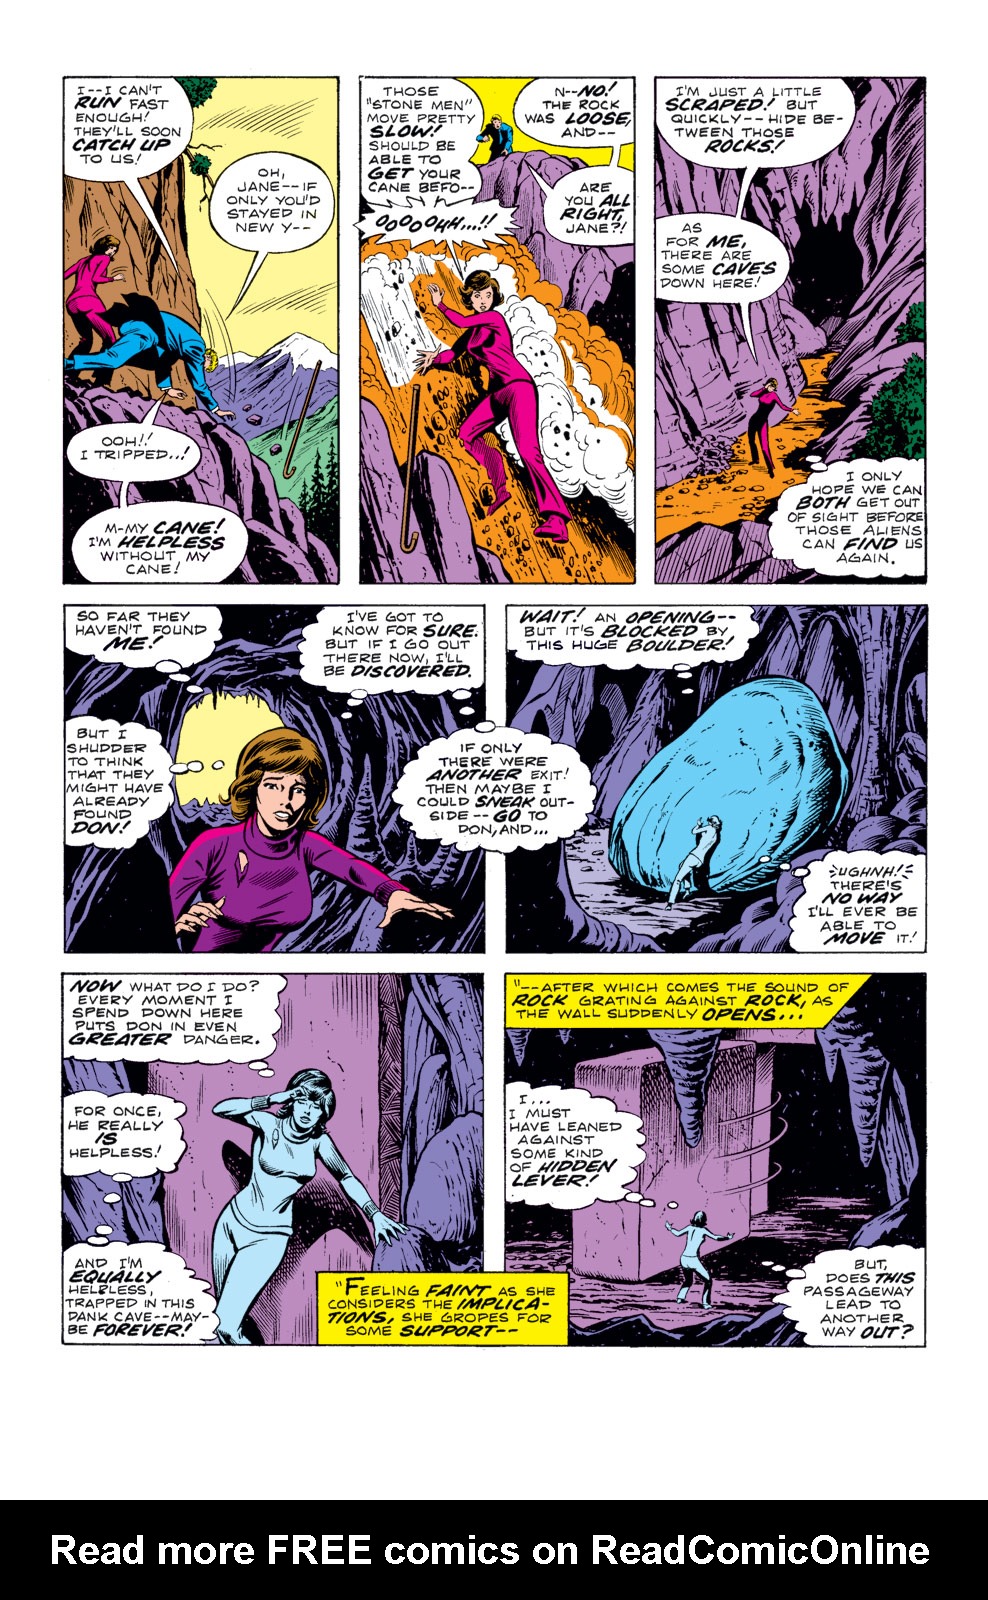 What If? (1977) issue 10 - Jane Foster had found the hammer of Thor - Page 7